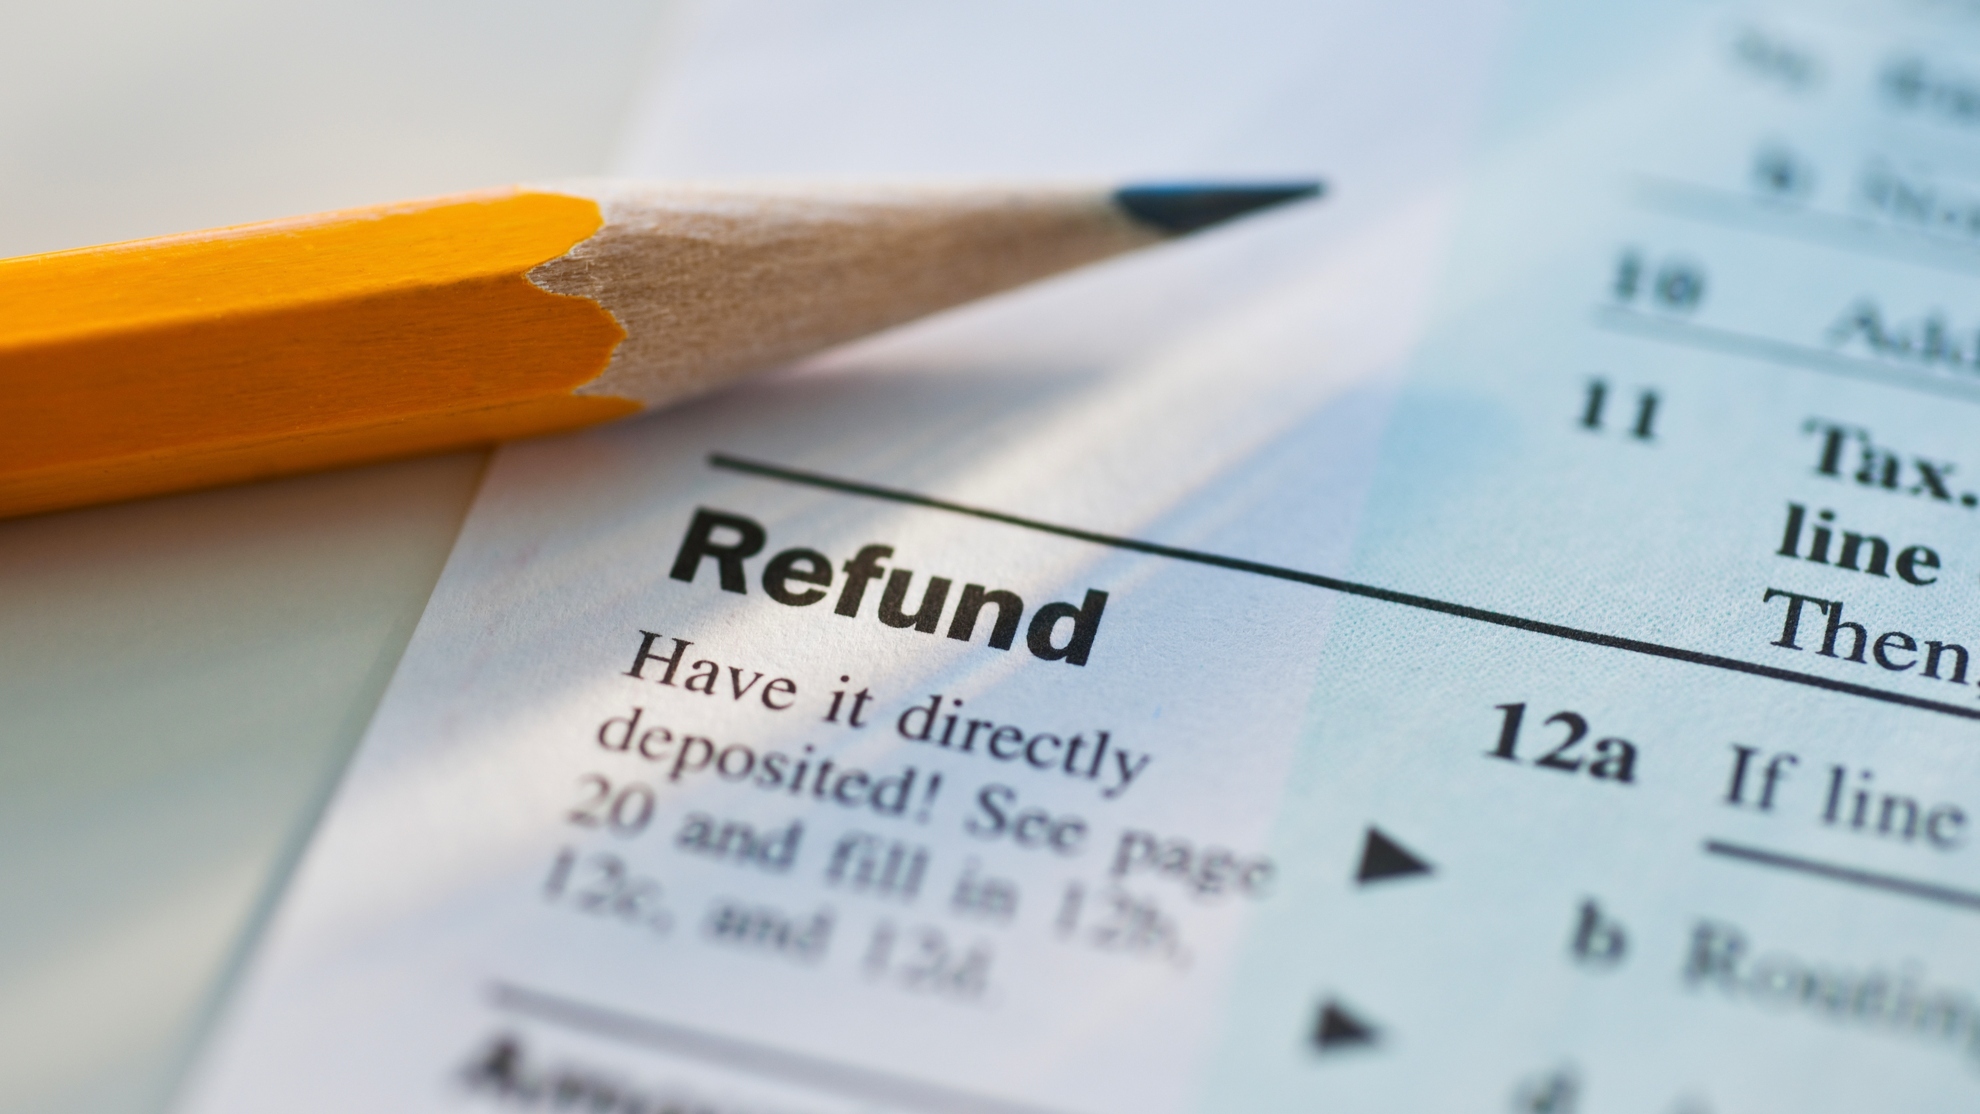 full-details-about-the-vat-refund-available-in-the-uae